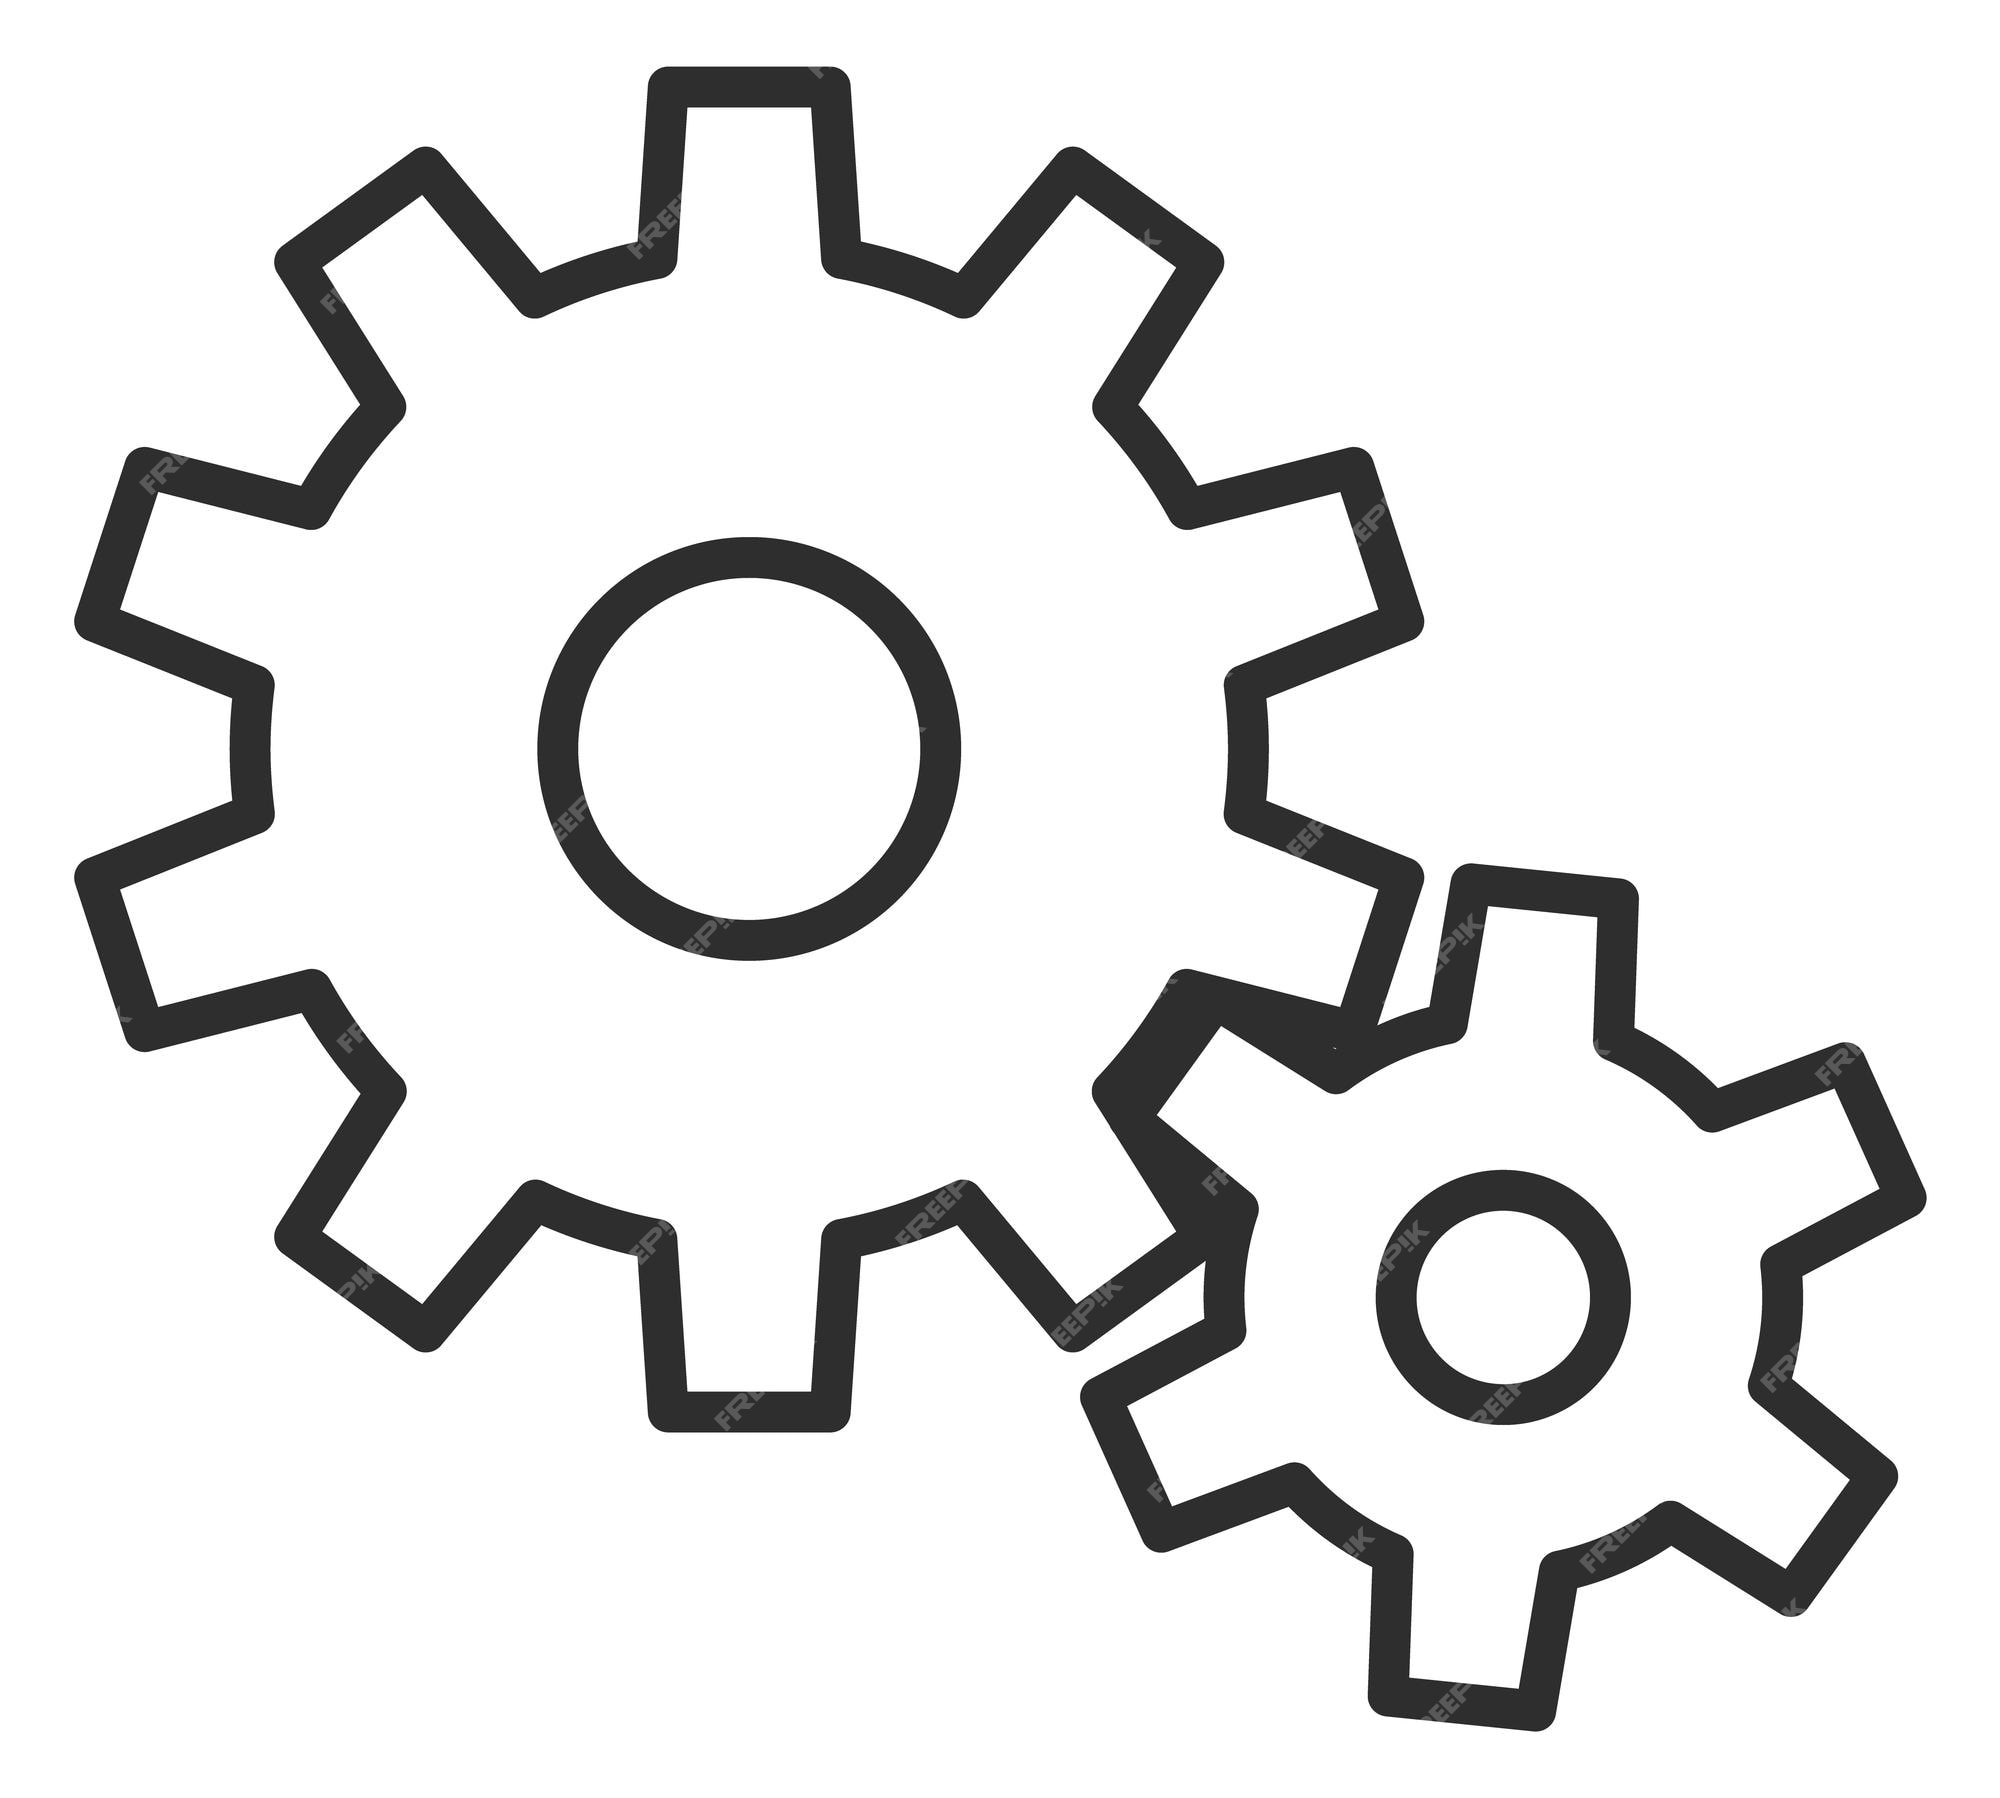 Gear icon symbol sign Symbols, Vector art, Gears, gears meaning